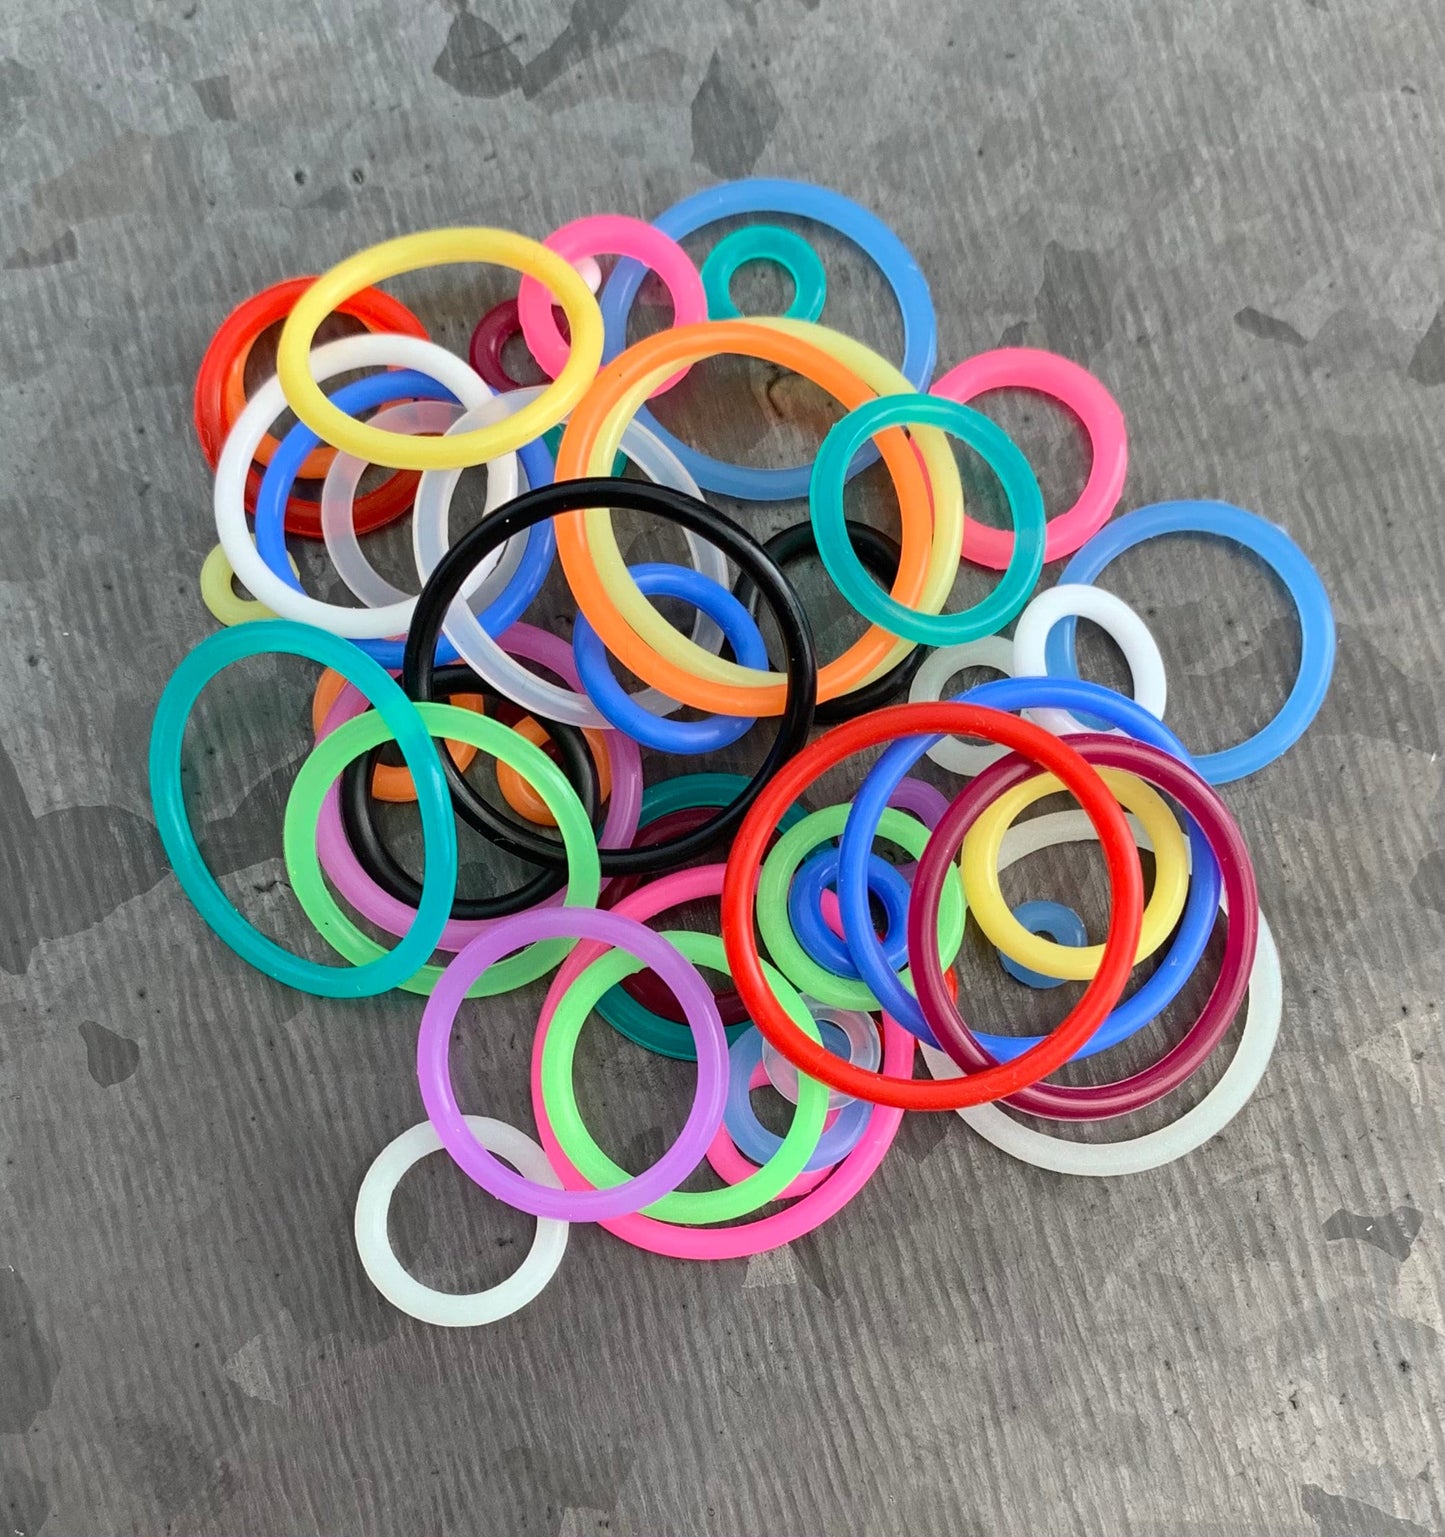 10 pack of Light Blue Replacement O-Rings Bands for Plugs or Tunnels - 13 more colors available!